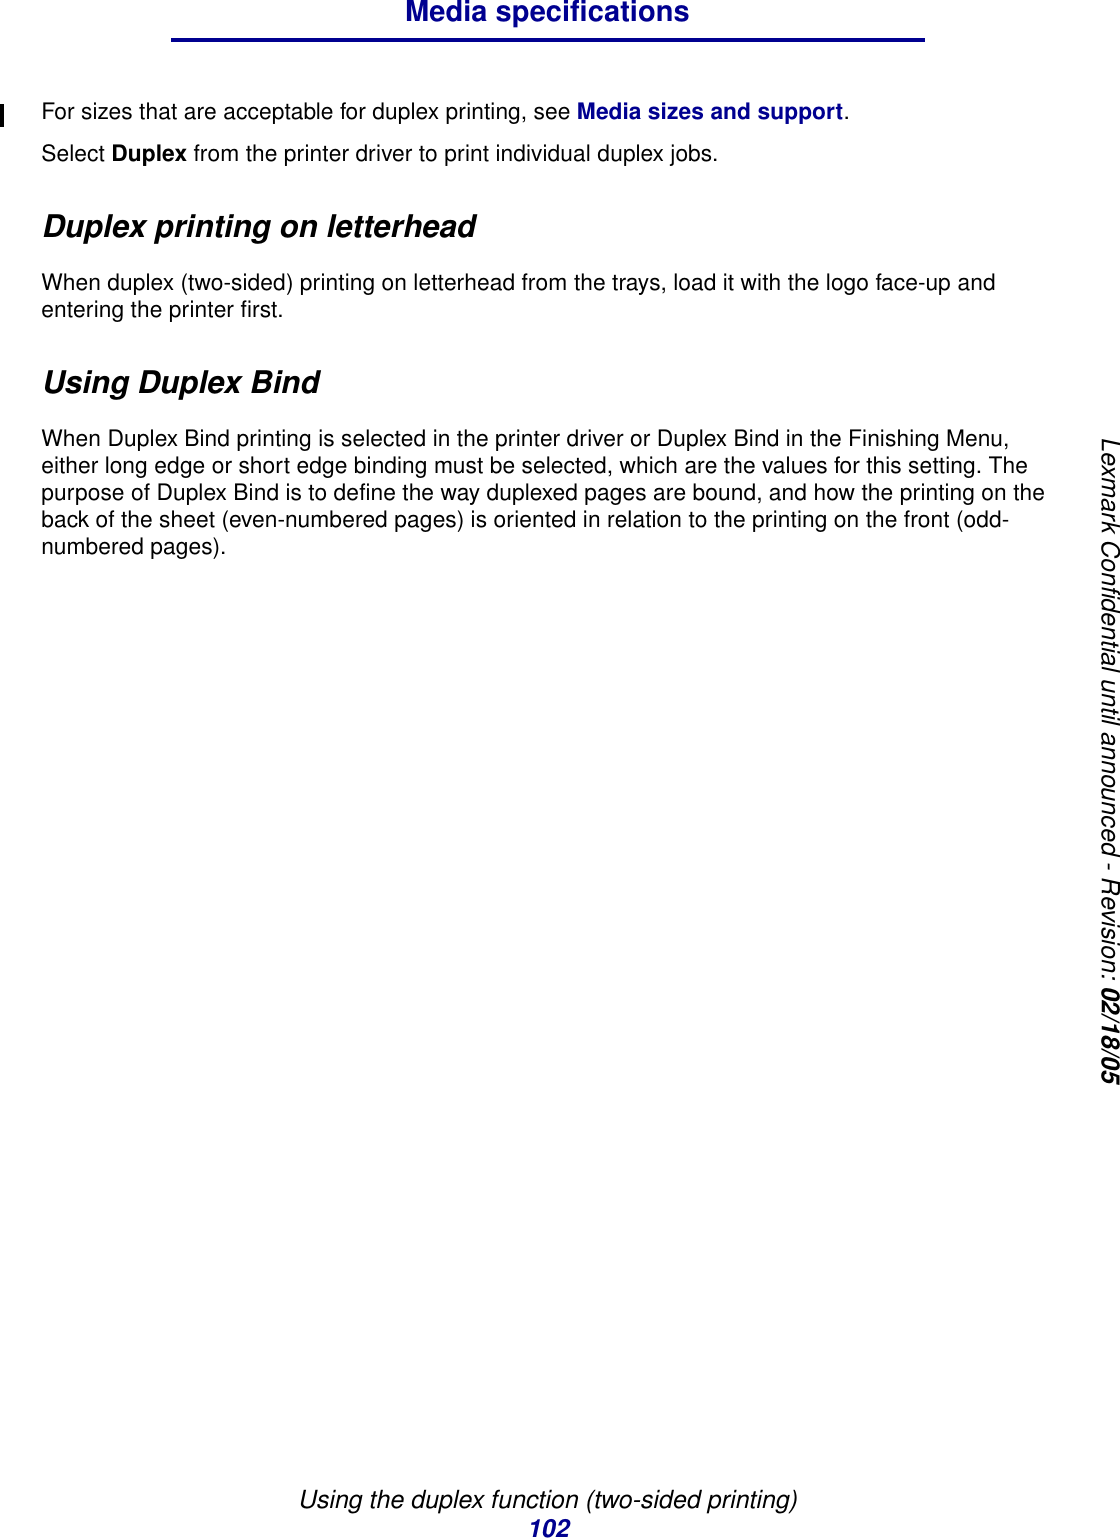 Using the duplex function (two-sided printing)102Media specificationsLexmark Confidential until announced - Revision: 02/18/05For sizes that are acceptable for duplex printing, see Media sizes and support.Select Duplex from the printer driver to print individual duplex jobs.Duplex printing on letterheadWhen duplex (two-sided) printing on letterhead from the trays, load it with the logo face-up and entering the printer first.Using Duplex BindWhen Duplex Bind printing is selected in the printer driver or Duplex Bind in the Finishing Menu, either long edge or short edge binding must be selected, which are the values for this setting. The purpose of Duplex Bind is to define the way duplexed pages are bound, and how the printing on the back of the sheet (even-numbered pages) is oriented in relation to the printing on the front (odd-numbered pages).